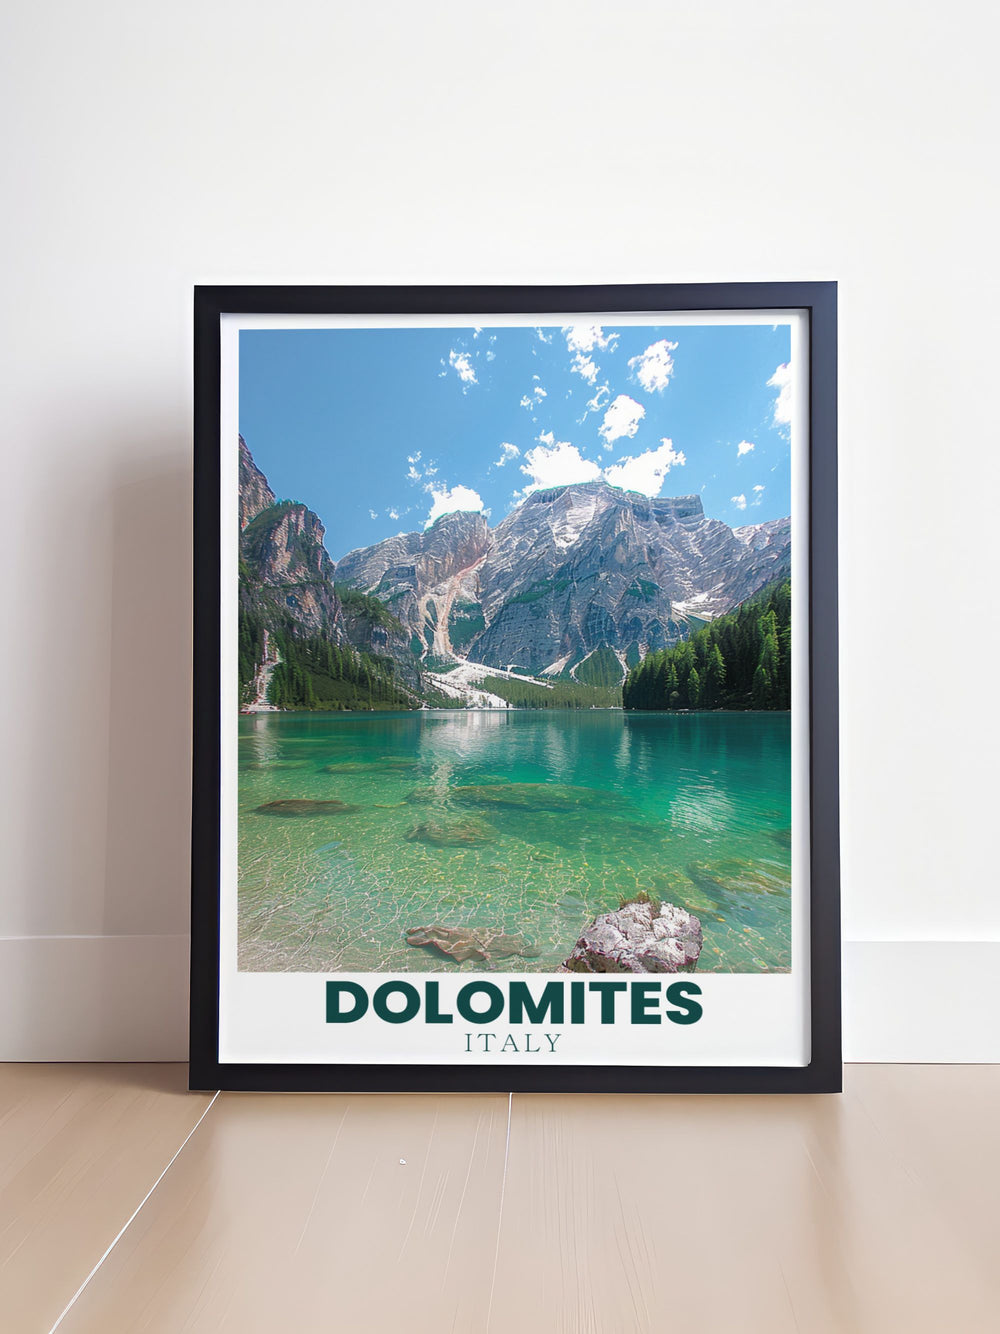 Beautiful Lago di Braies Prints capturing the serene ambiance of this iconic alpine lake. Ideal for Italy home decor and gifts. These travel prints highlight the enchanting landscapes of the Dolomites Italy and are perfect for any room.